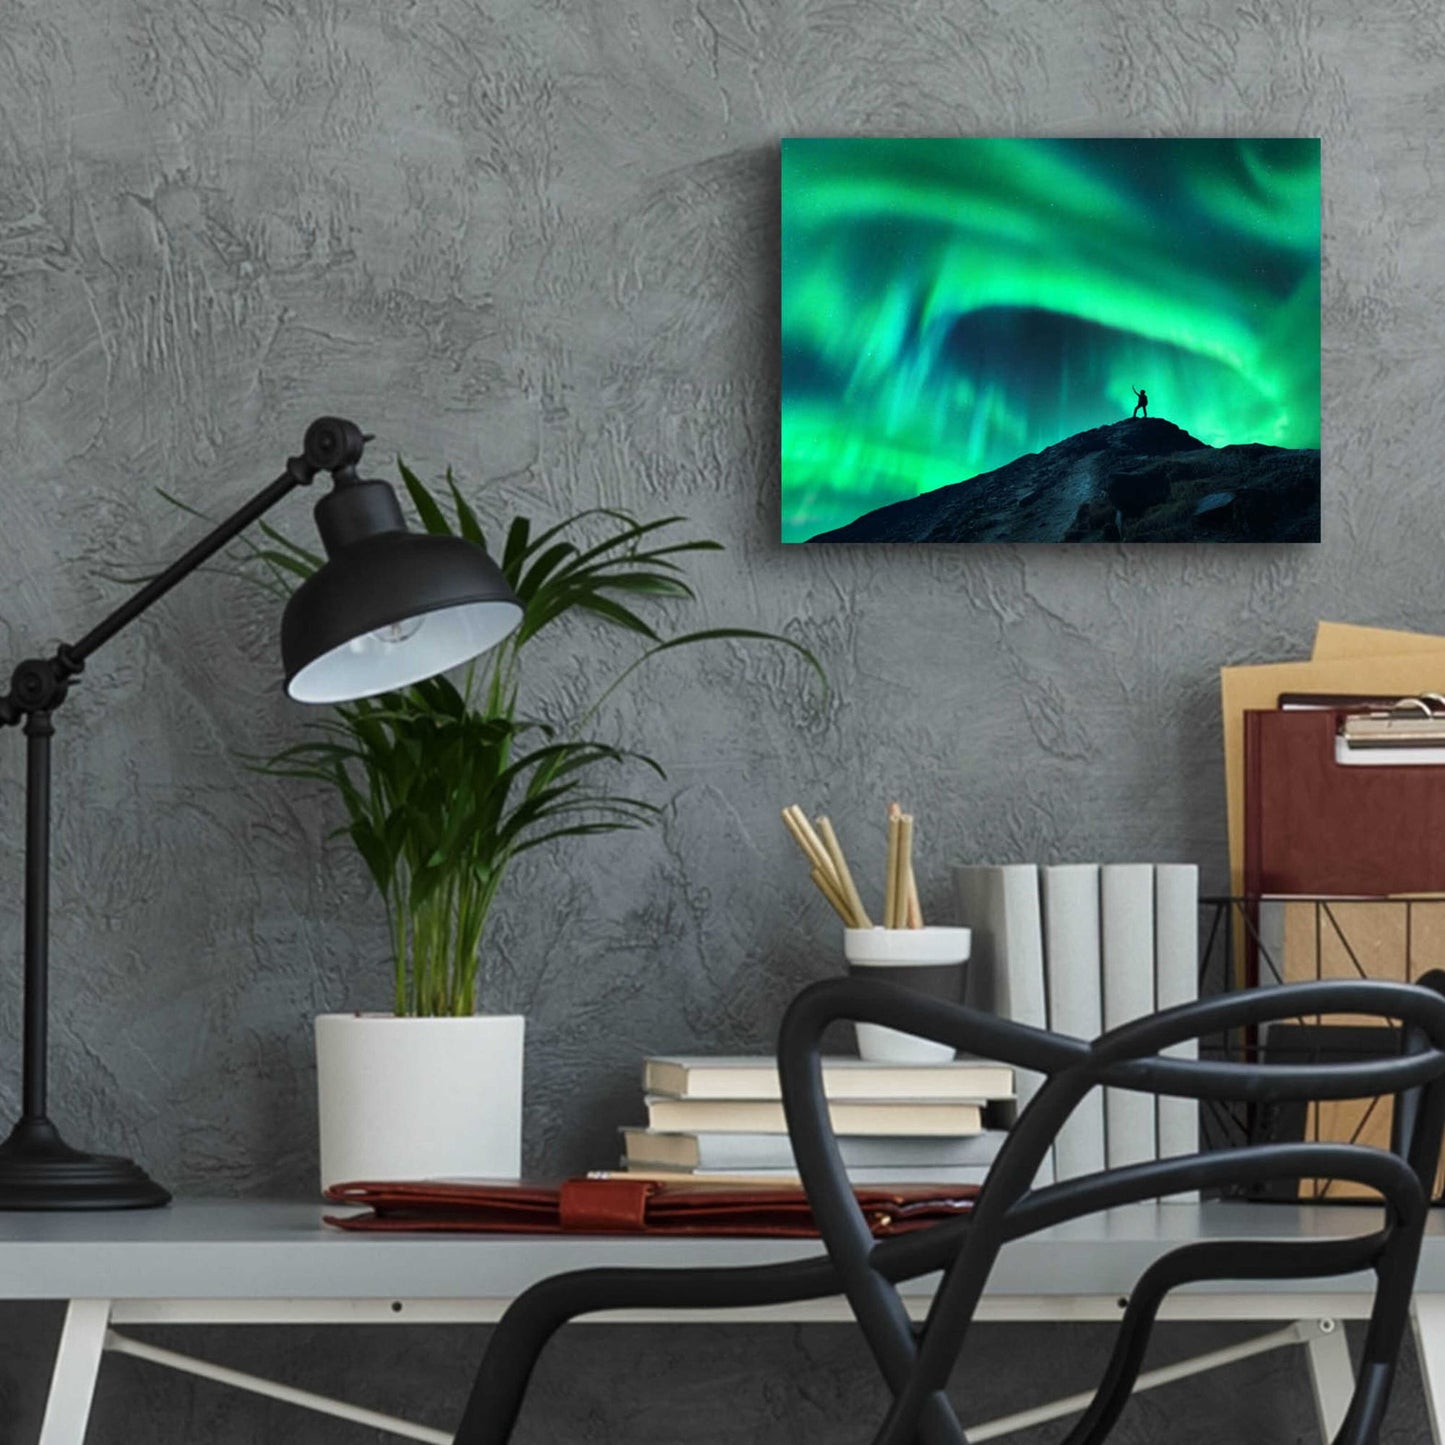 Epic Art 'Northern Lights And Woman' by Epic Portfolio, Acrylic Glass Wall Art,16x12